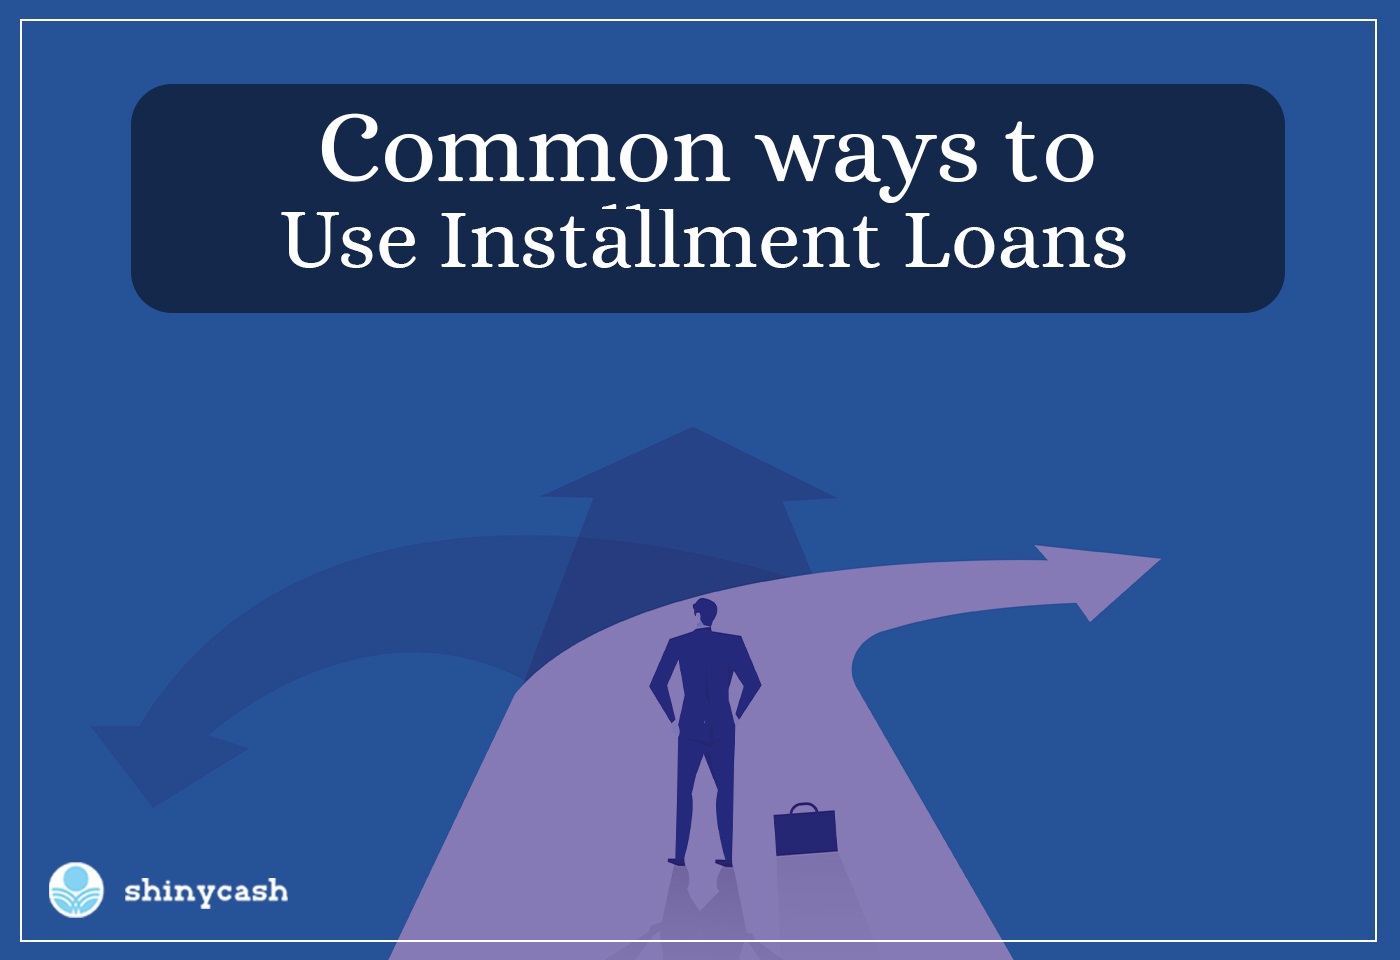 4 Common Ways to Use Installment Loans